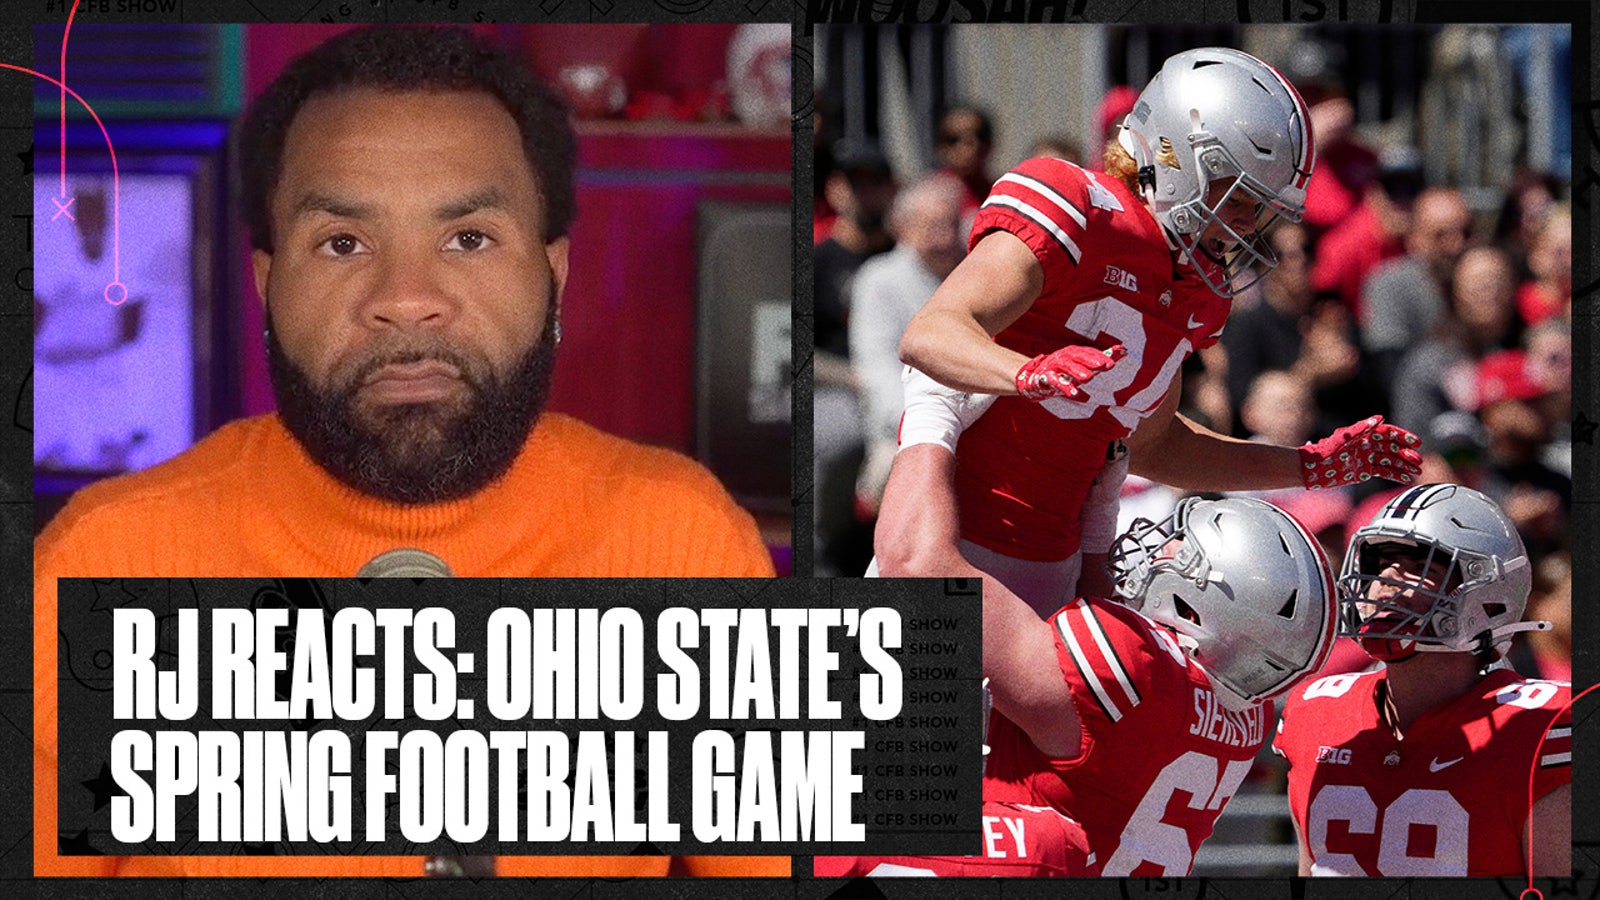 Ohio State spring game reaction: The time is now for the Buckeyes